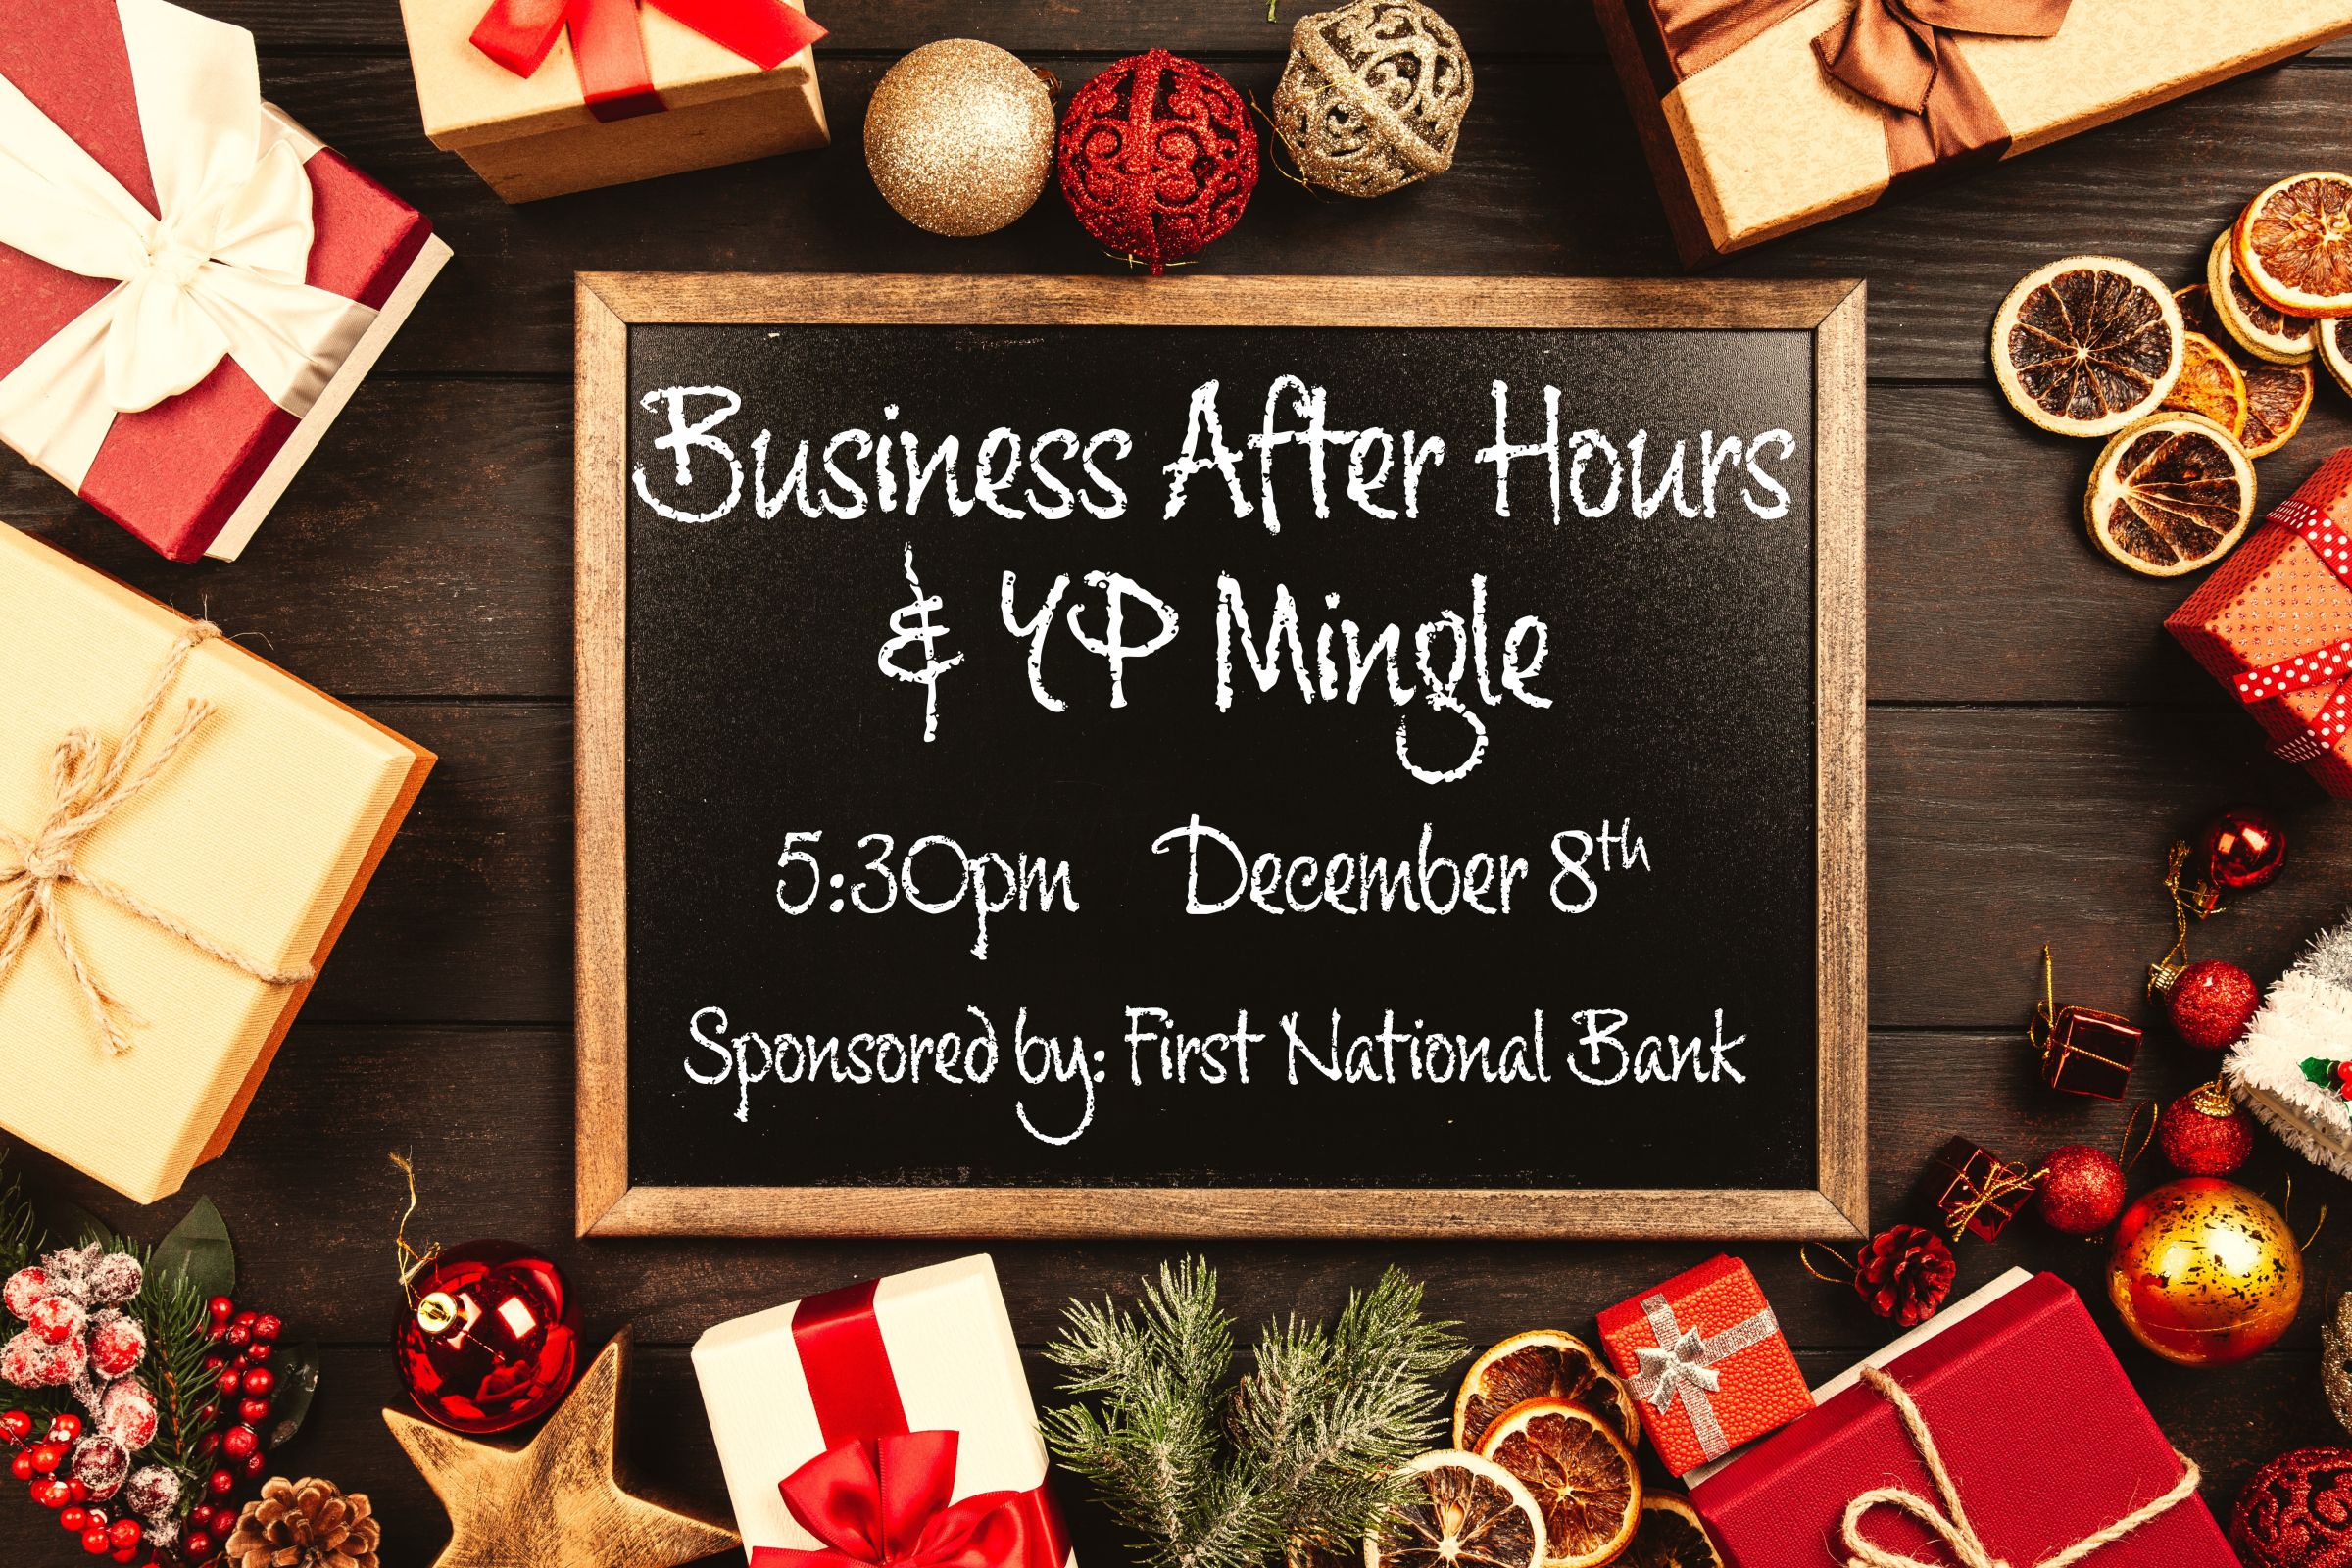 Event Promo Photo For Business After Hours & YP Mingle